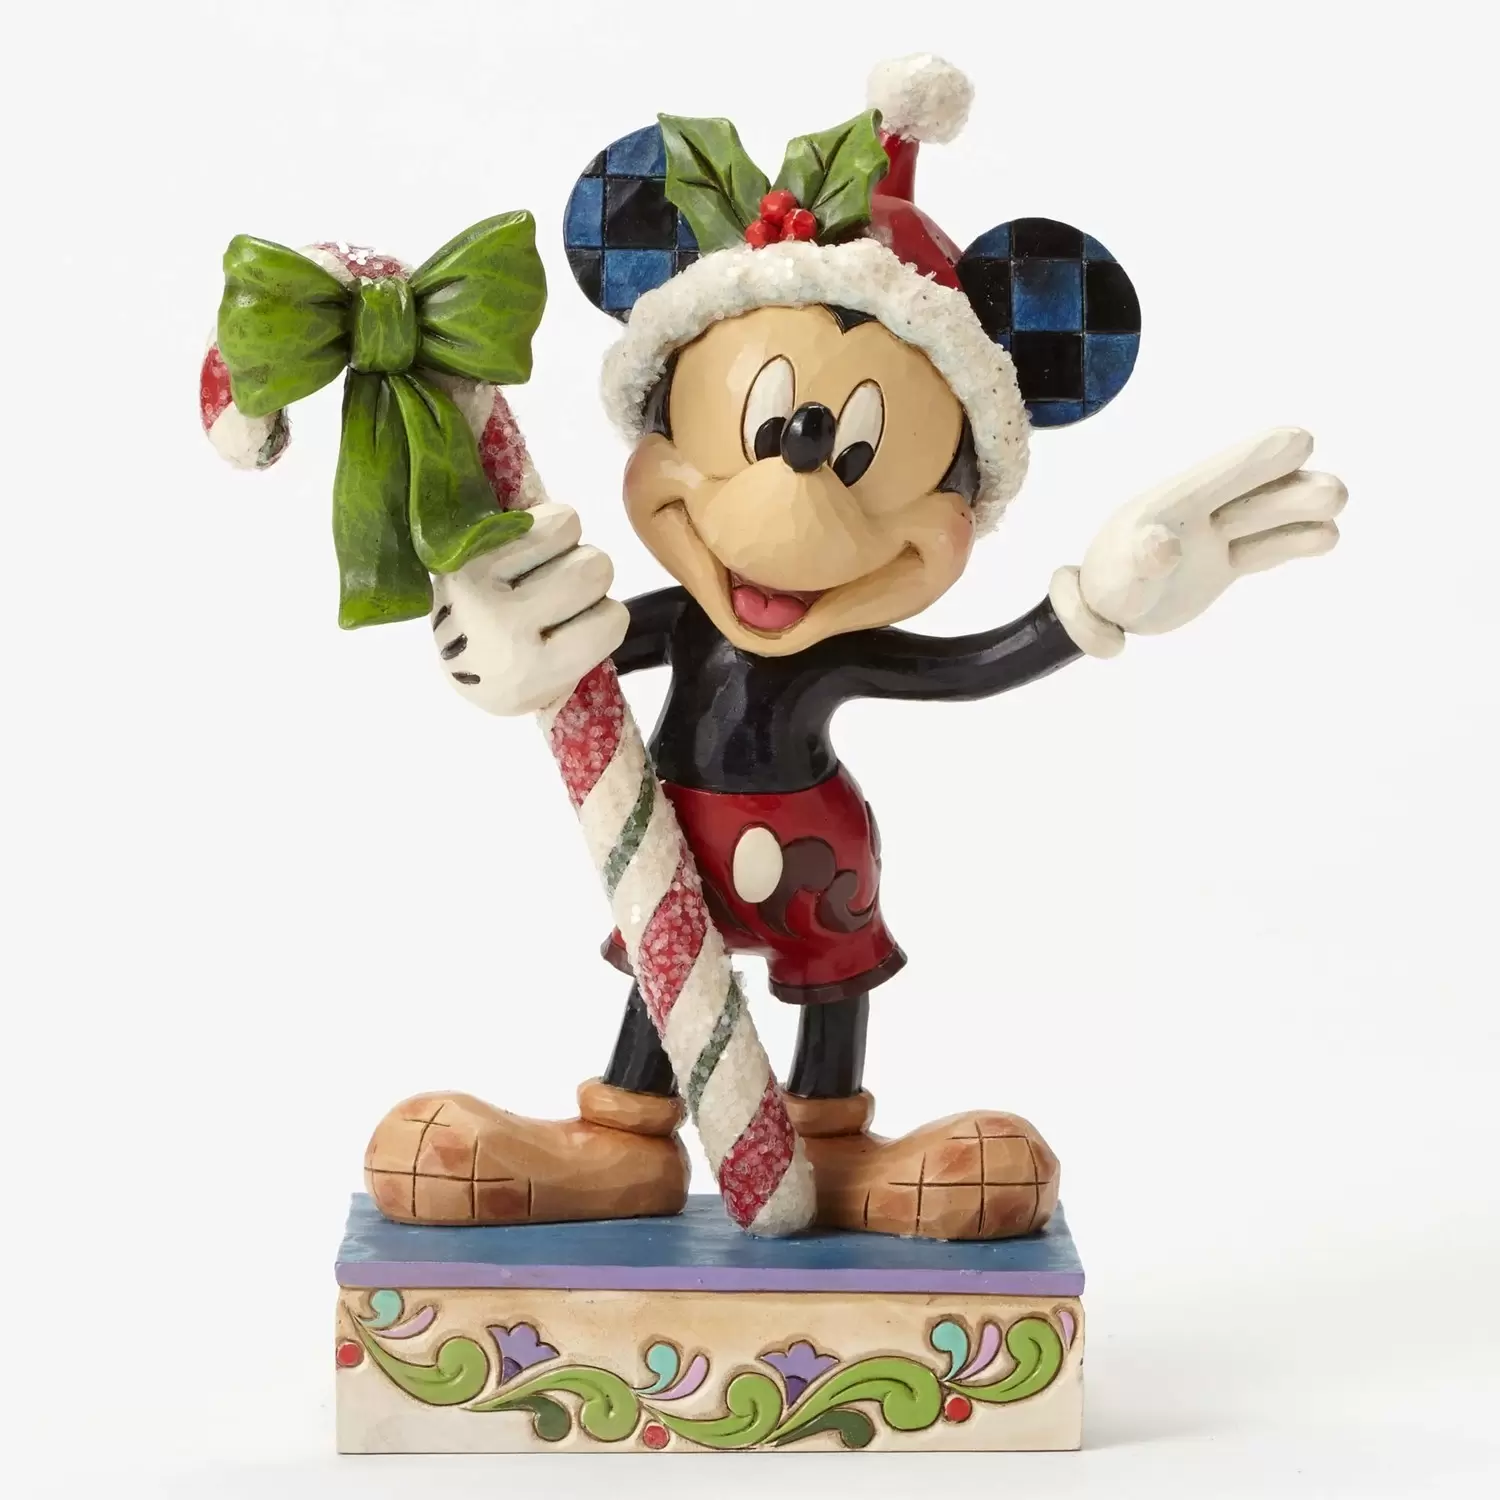 Disney Traditions by Jim Shore - Sweet Greetings - Mickey Mouse with Candy Cane